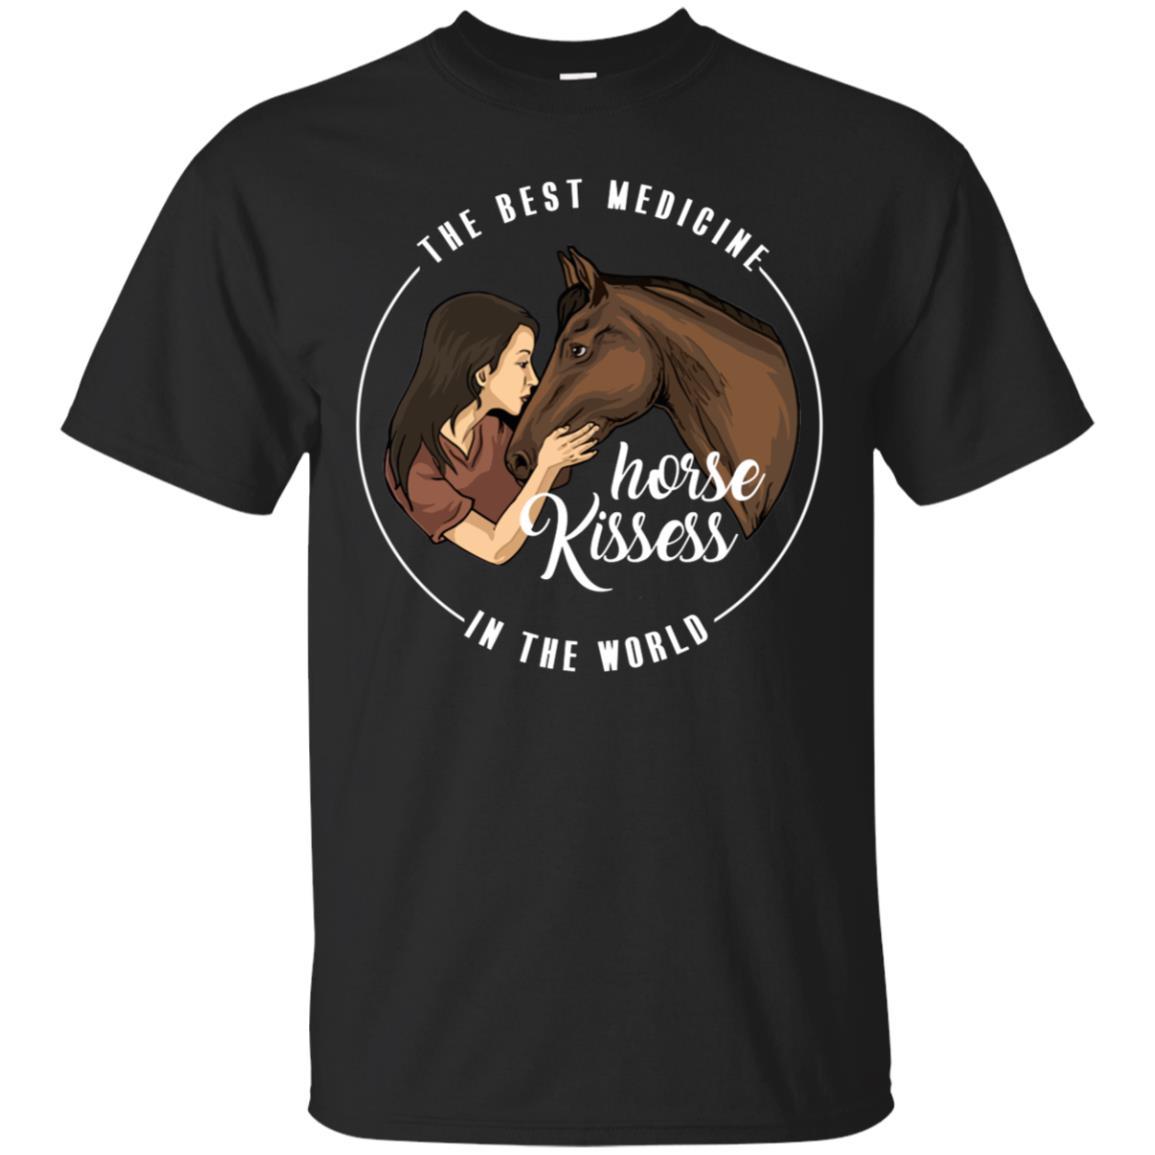 The Best Medicine Horse Kisses In The World Shirt